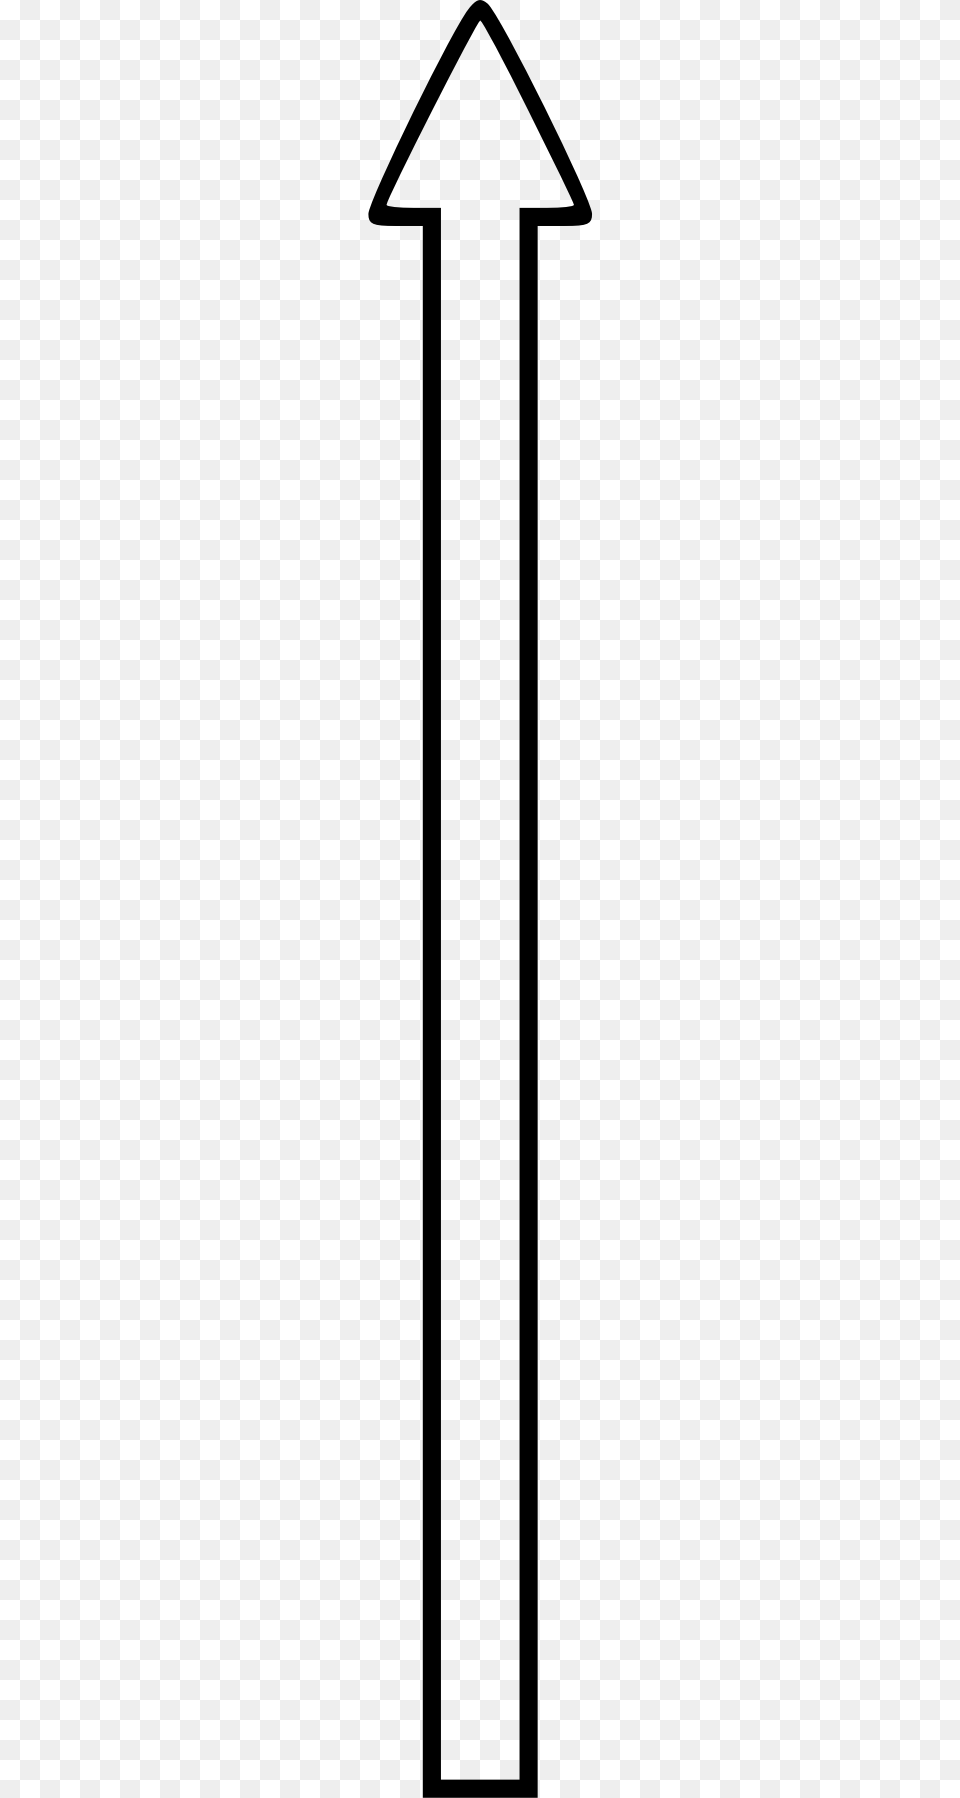 Simple Long Up Arrow Whitelack Border Icons, Gray Free Png